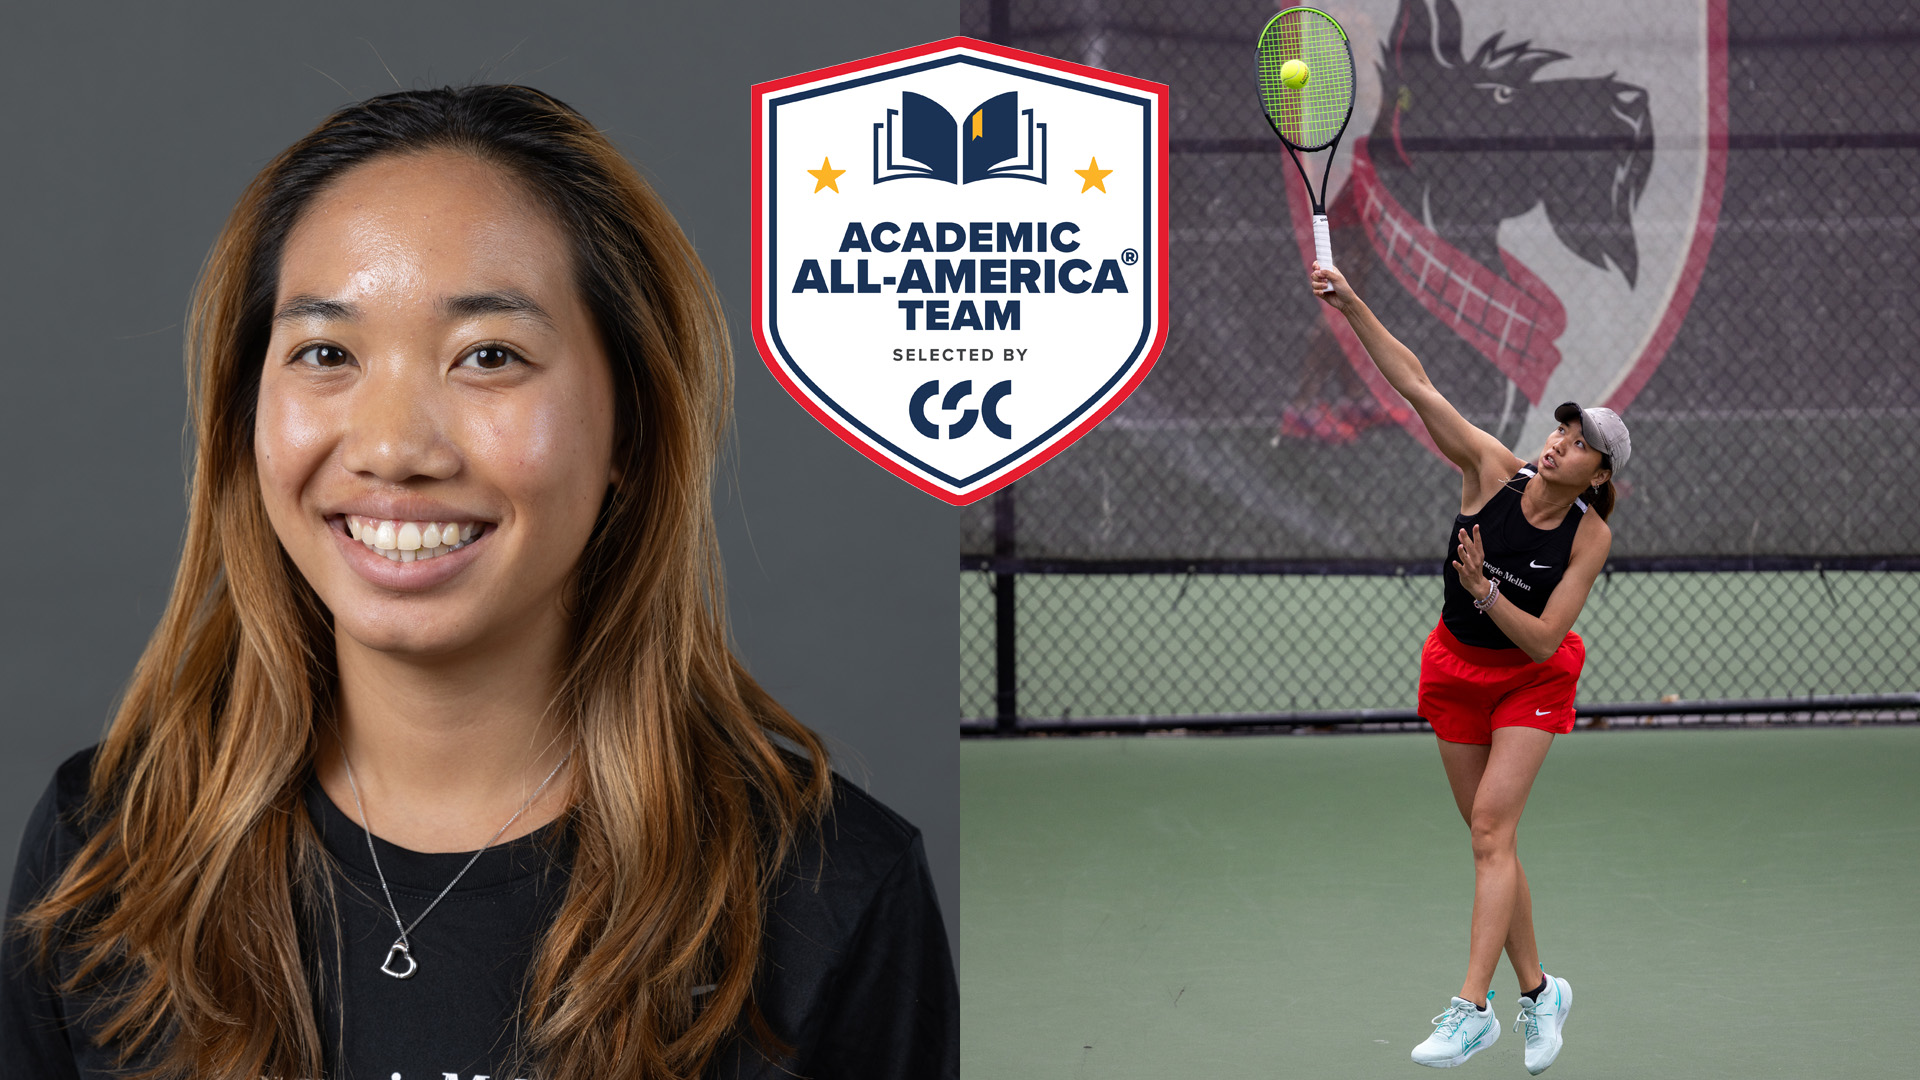 portrait image of a woman with long brown hair with a tennis action image to the side and the Academic All-America Team logo in the center